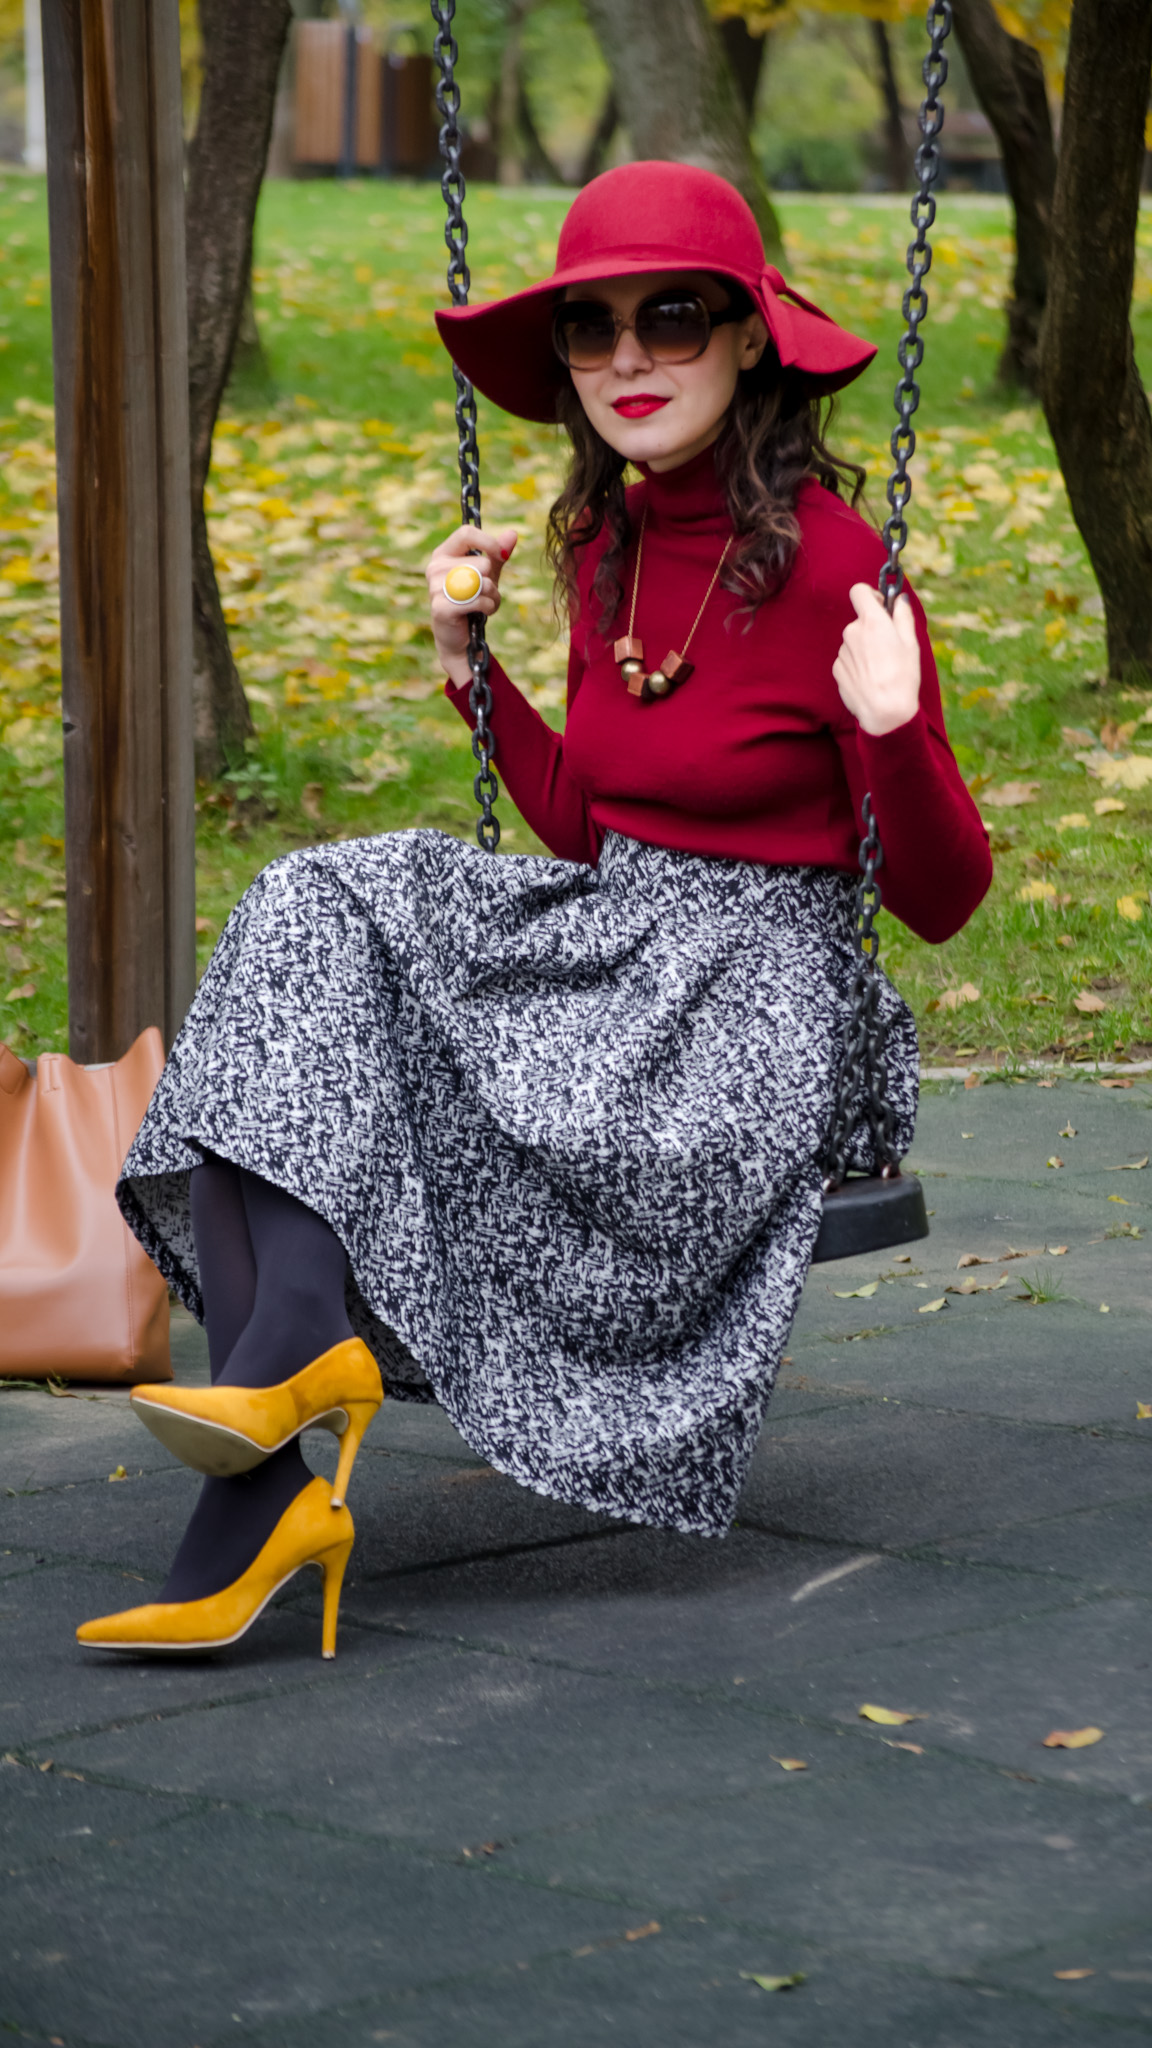 50s vibes and burgundy for fall floppy hat poema mustard shoes puffed up skirt black terranova jacket turtleneck koton over sized camel bag autumn fall park